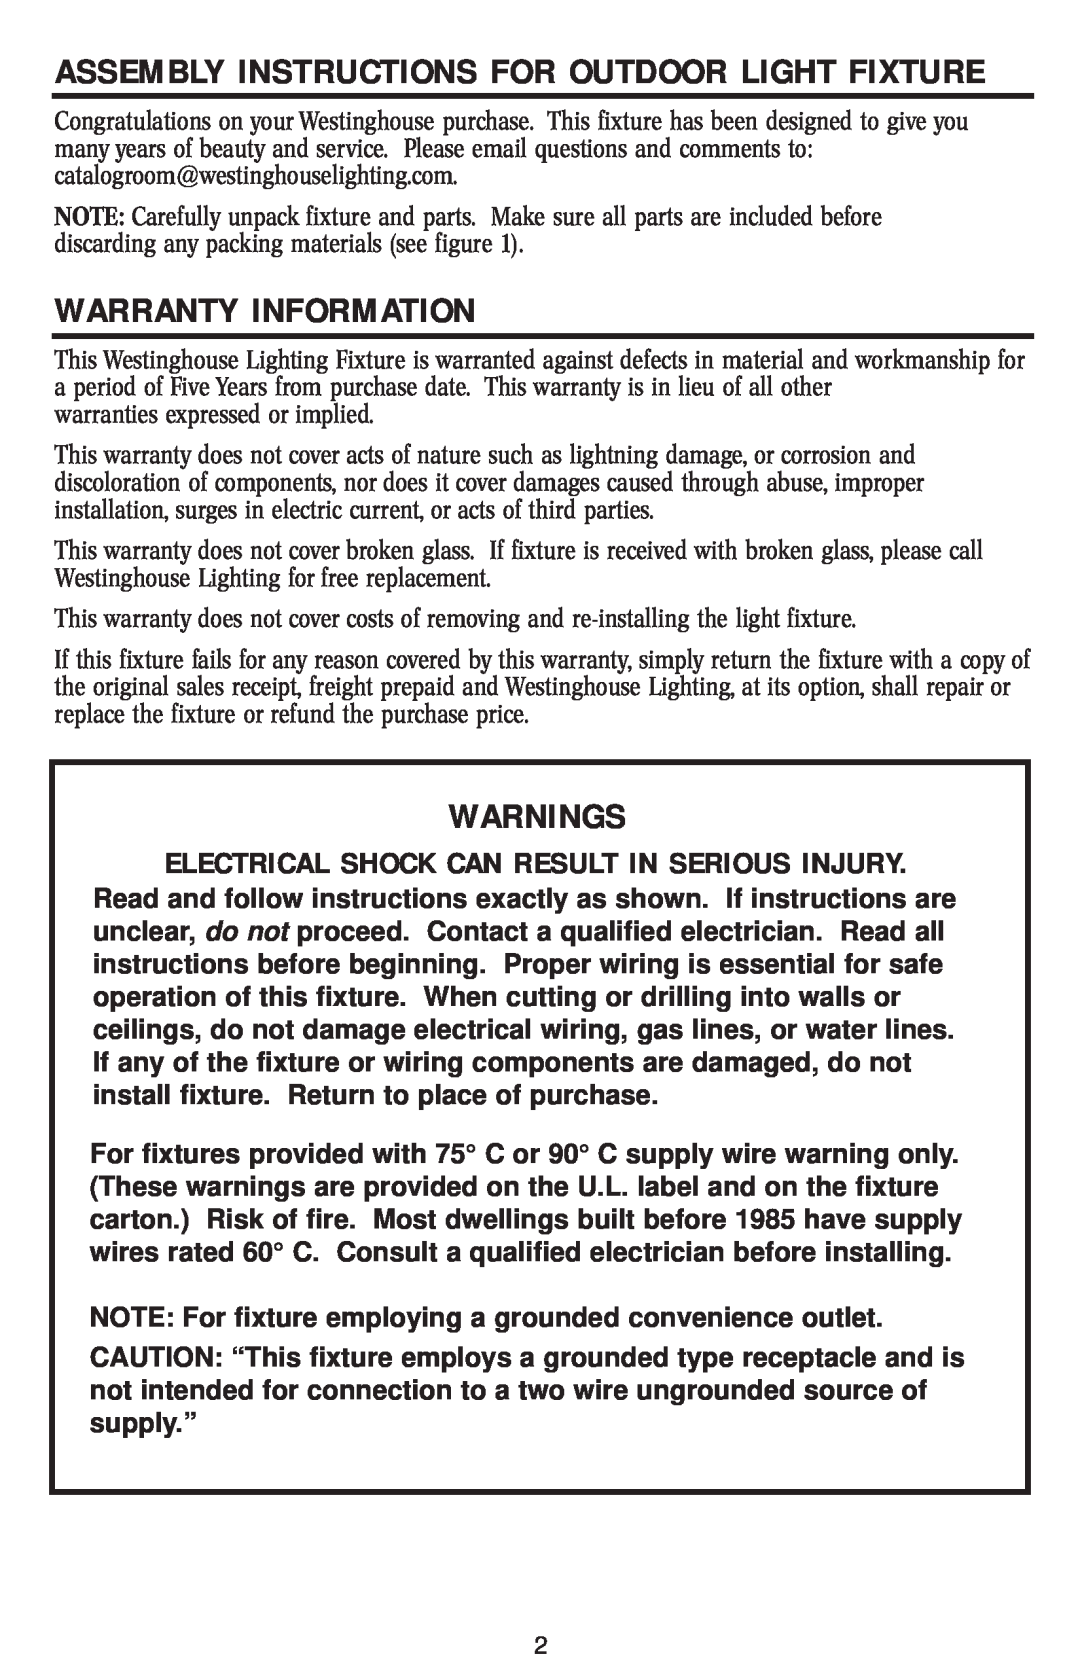 Westinghouse w-031 owner manual Warranty Information, Warnings, Assembly Instructions For Outdoor Light Fixture 